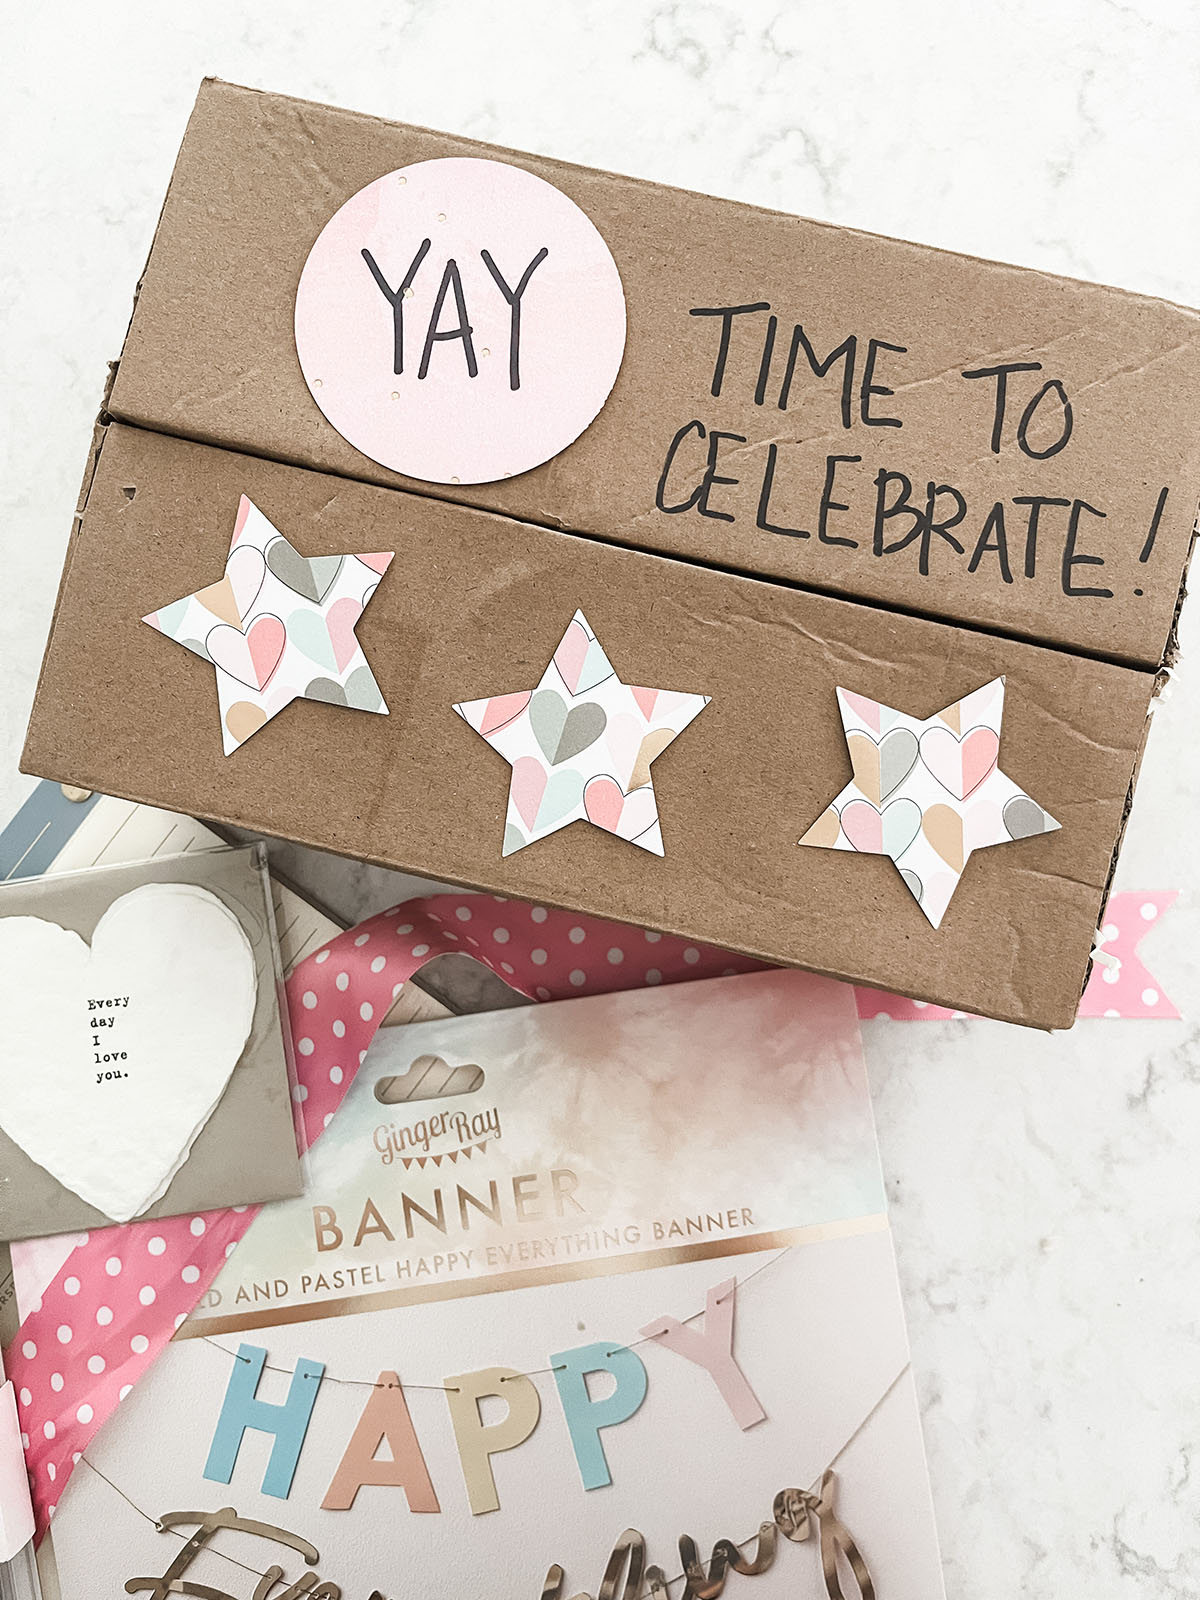 Brown box decorated with paper cut outs in the shape of stars laying next to pink polka dot ribbon and happy birthday banner sitting on white kitchen island.